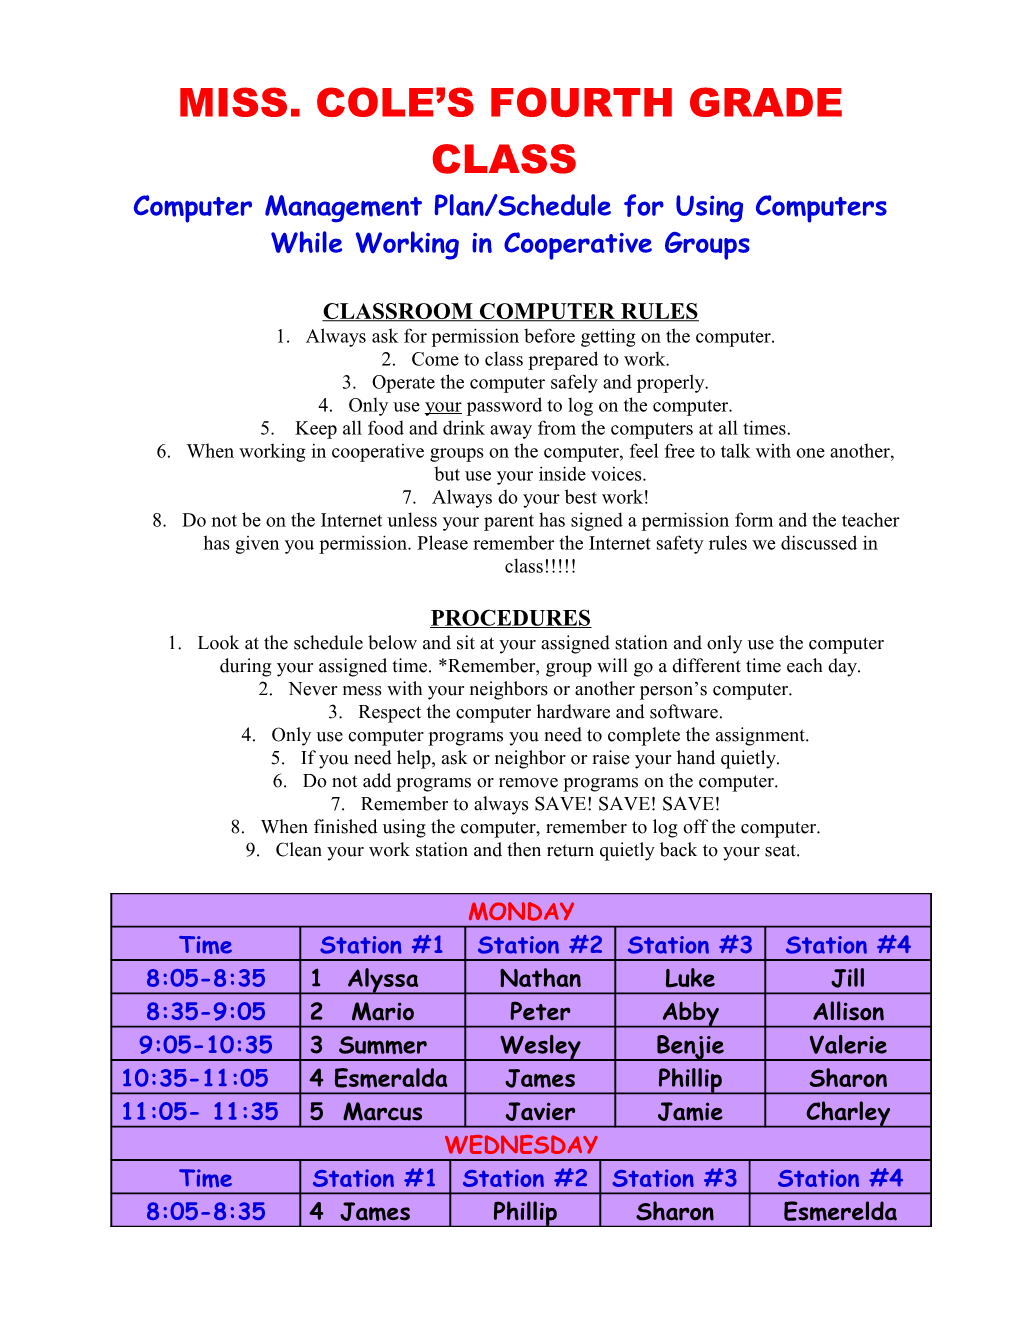 Computer Management Plan/Schedule for Using Computers While Working in Cooperative Pairs